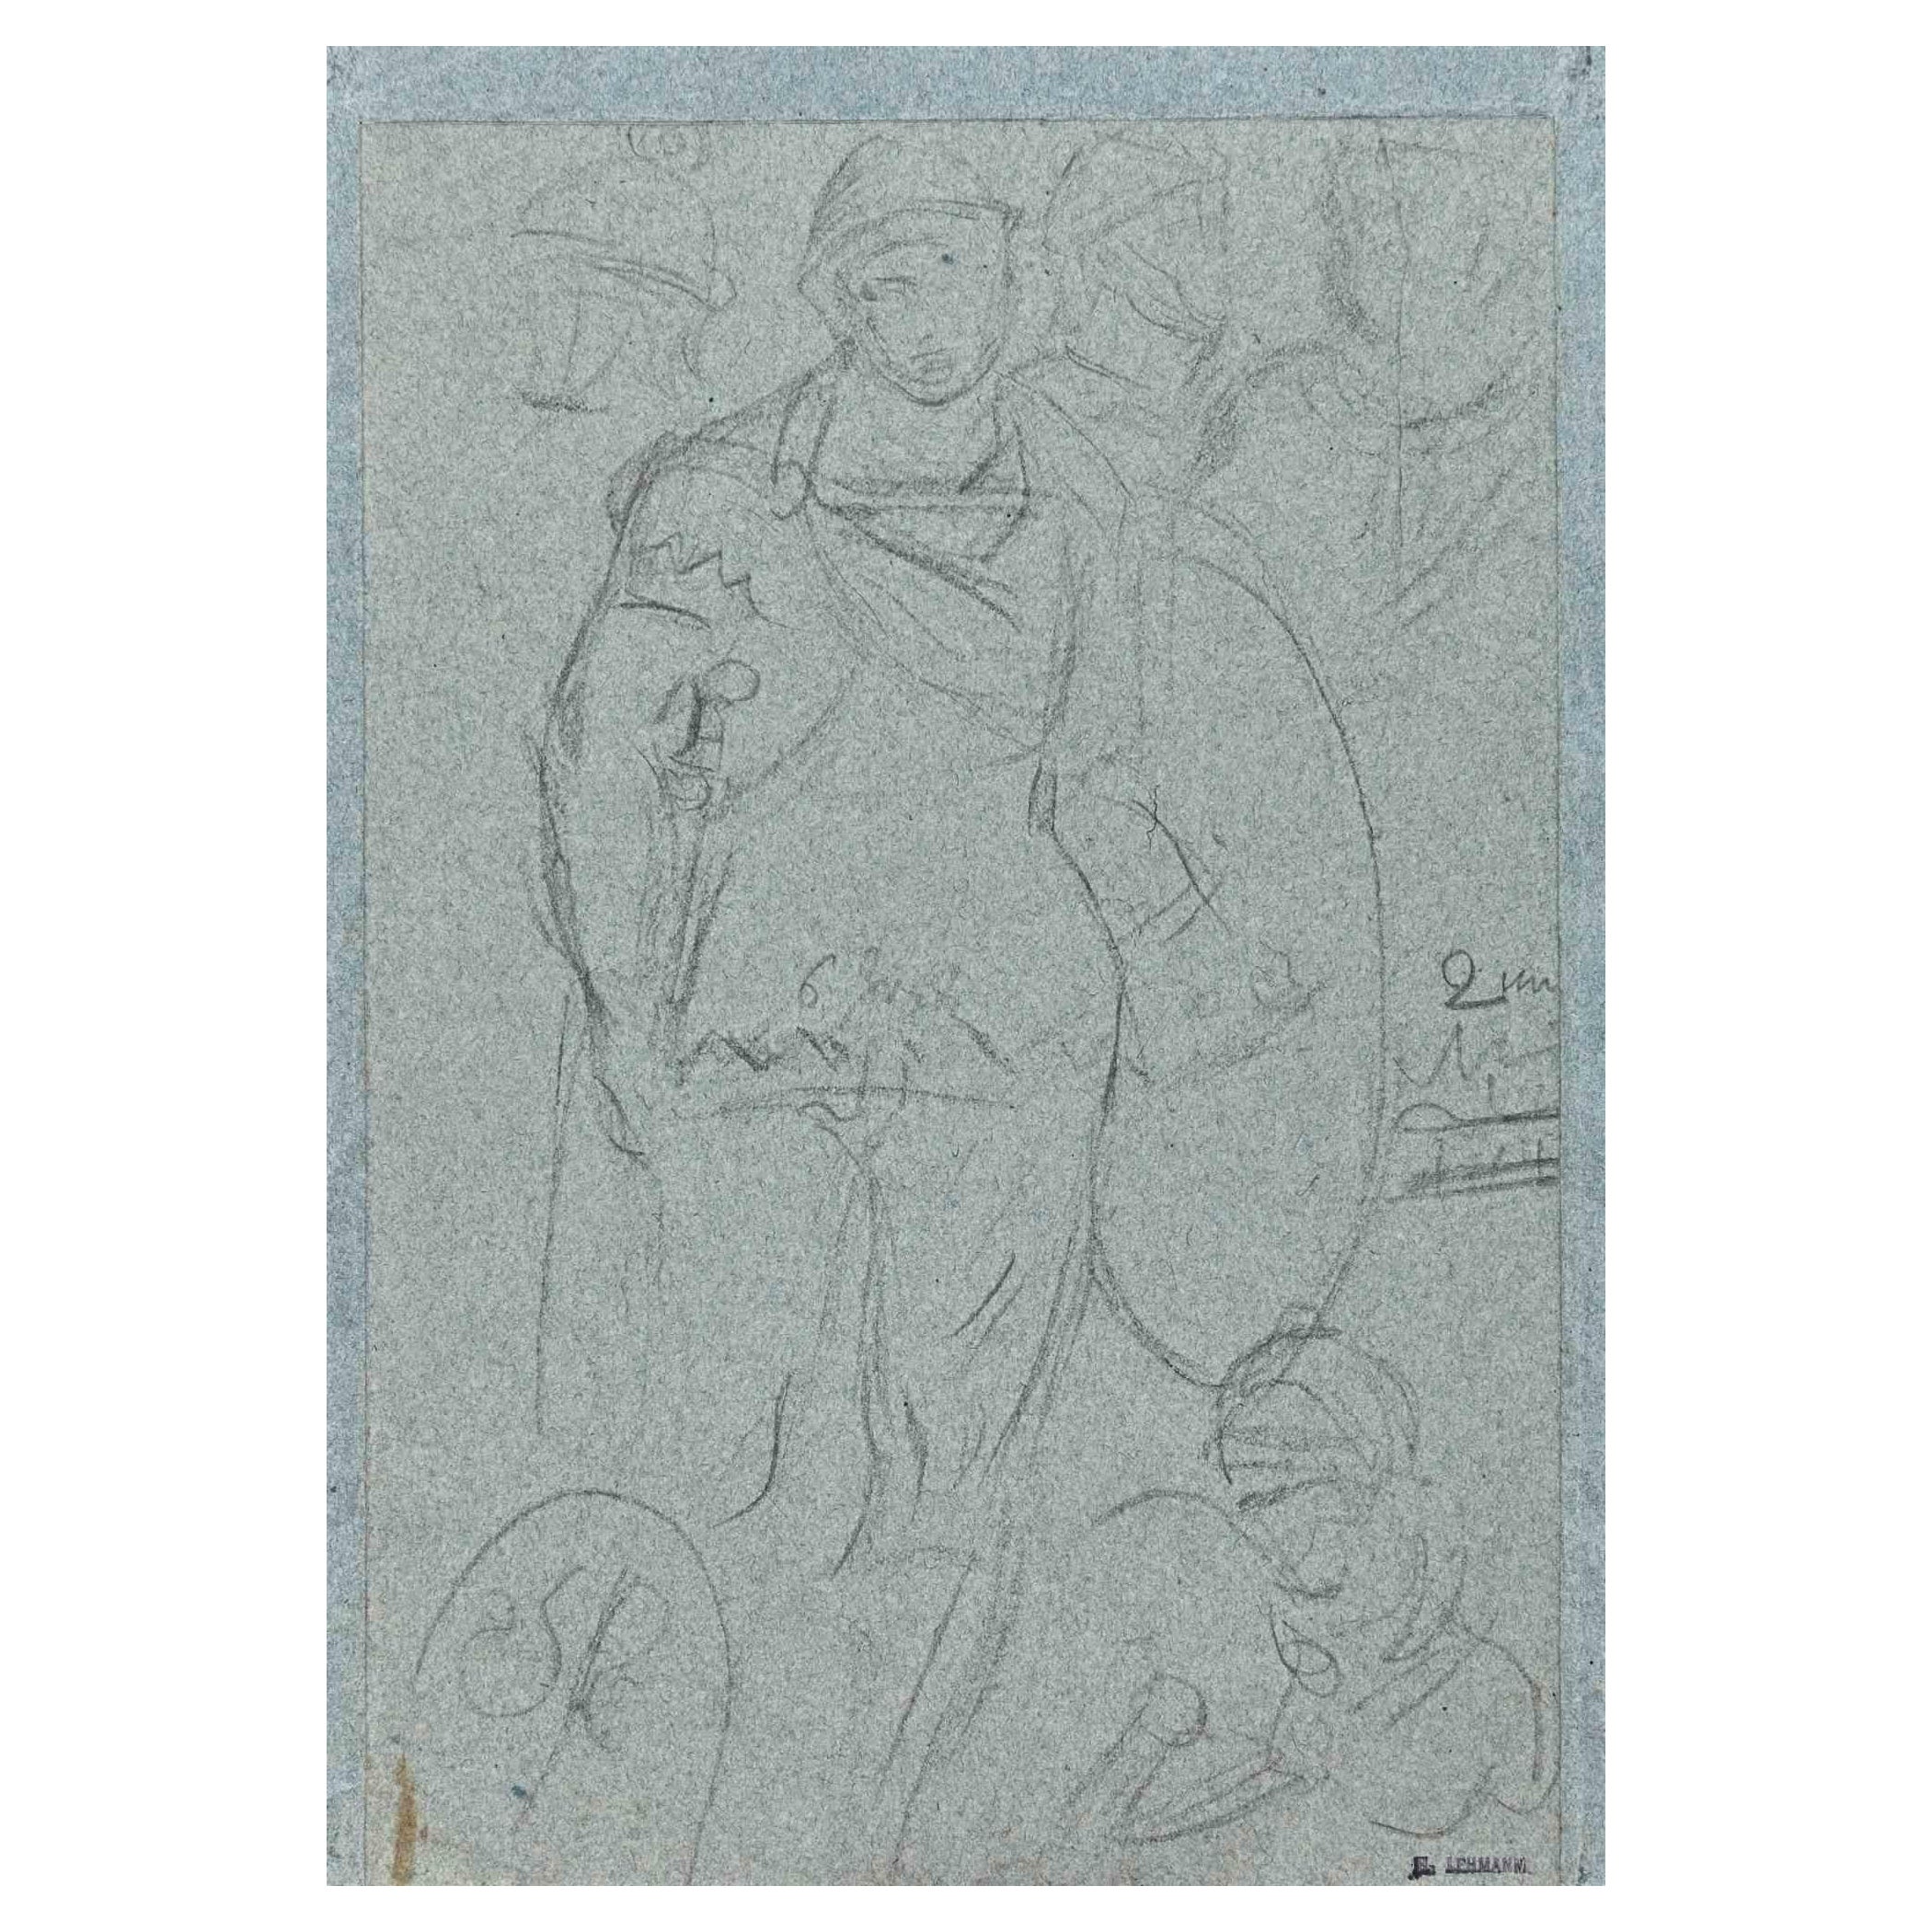 Soldier is an original Drawing on paper realized by the painter Henri Lehmann (1814-1882).

Drawing in Pencil. 

Stamped on the lower.

Good conditions.

